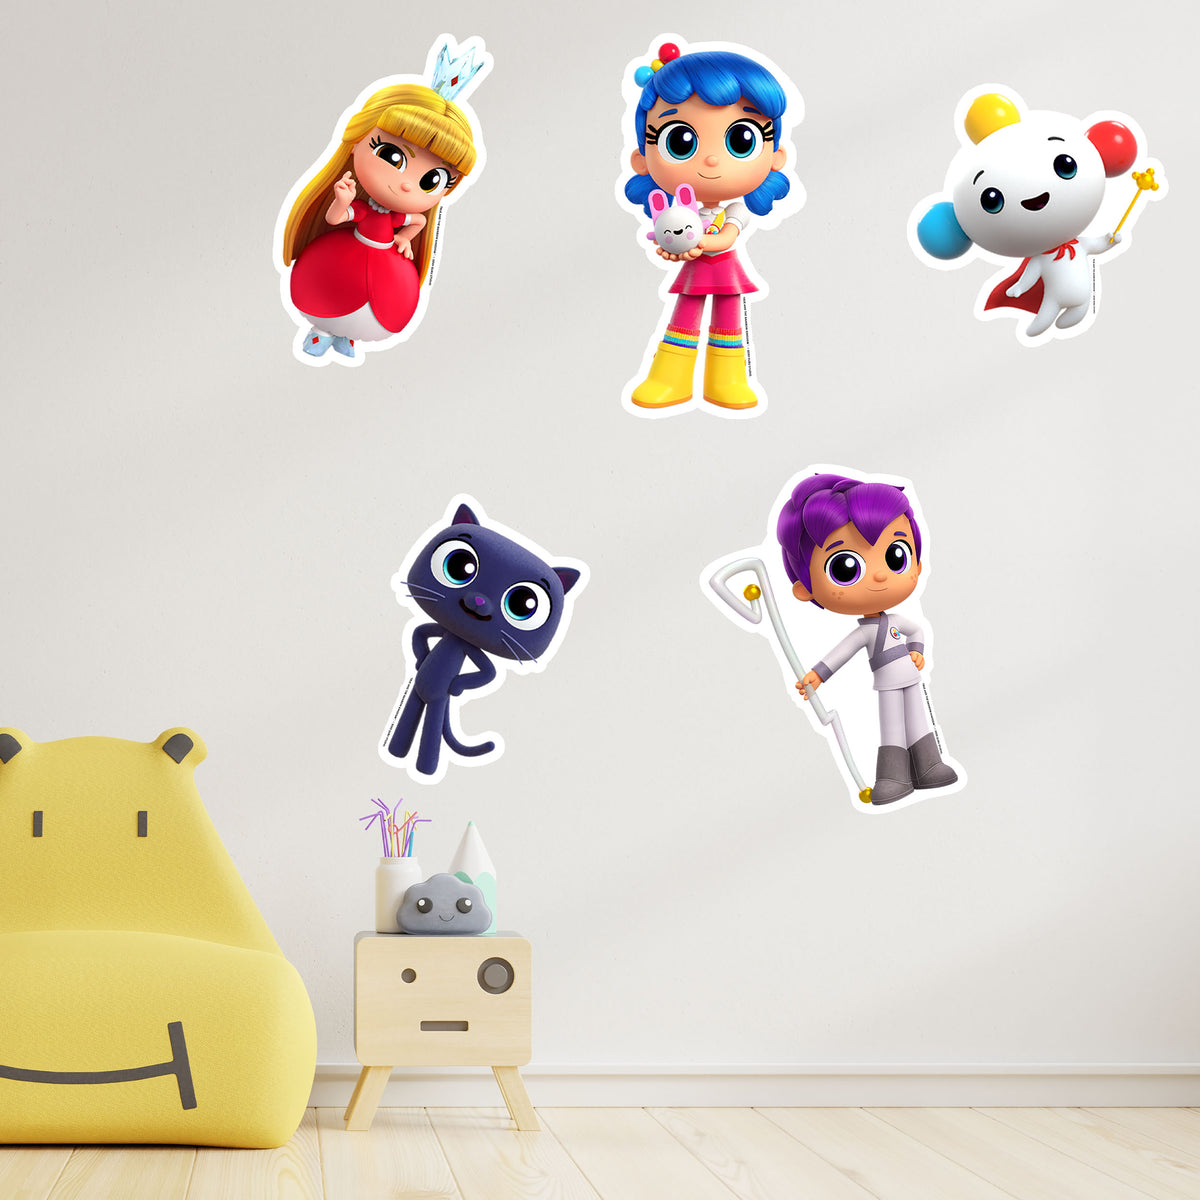 5 Pcs True and the Rainbow Kingdom Wall Stickers - Brighten Up Your Space with Magical Decor!